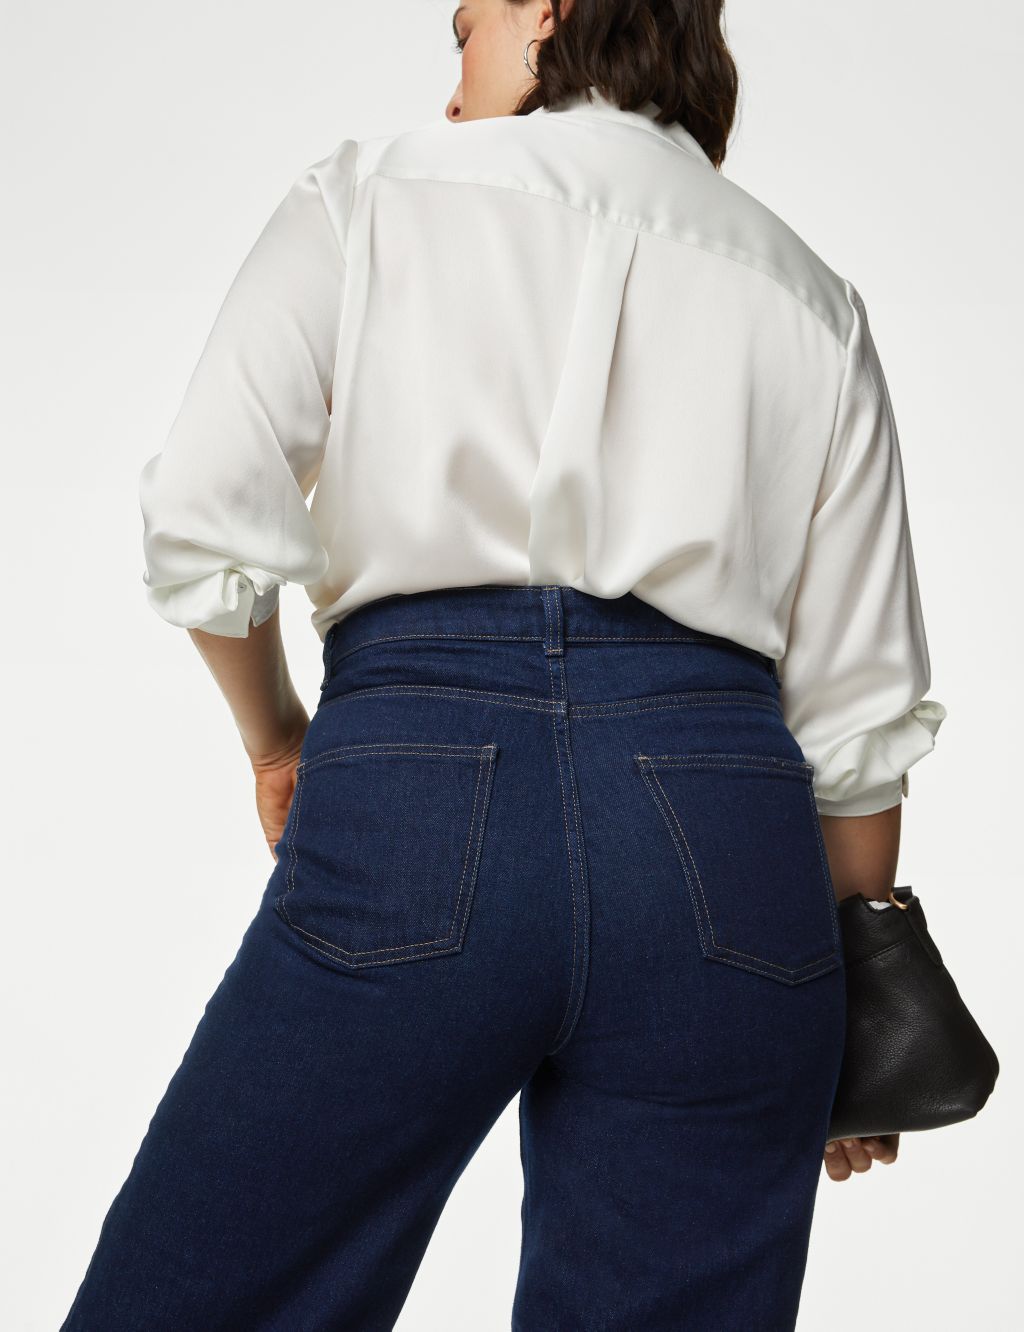 The Wide-Leg Jeans image 2